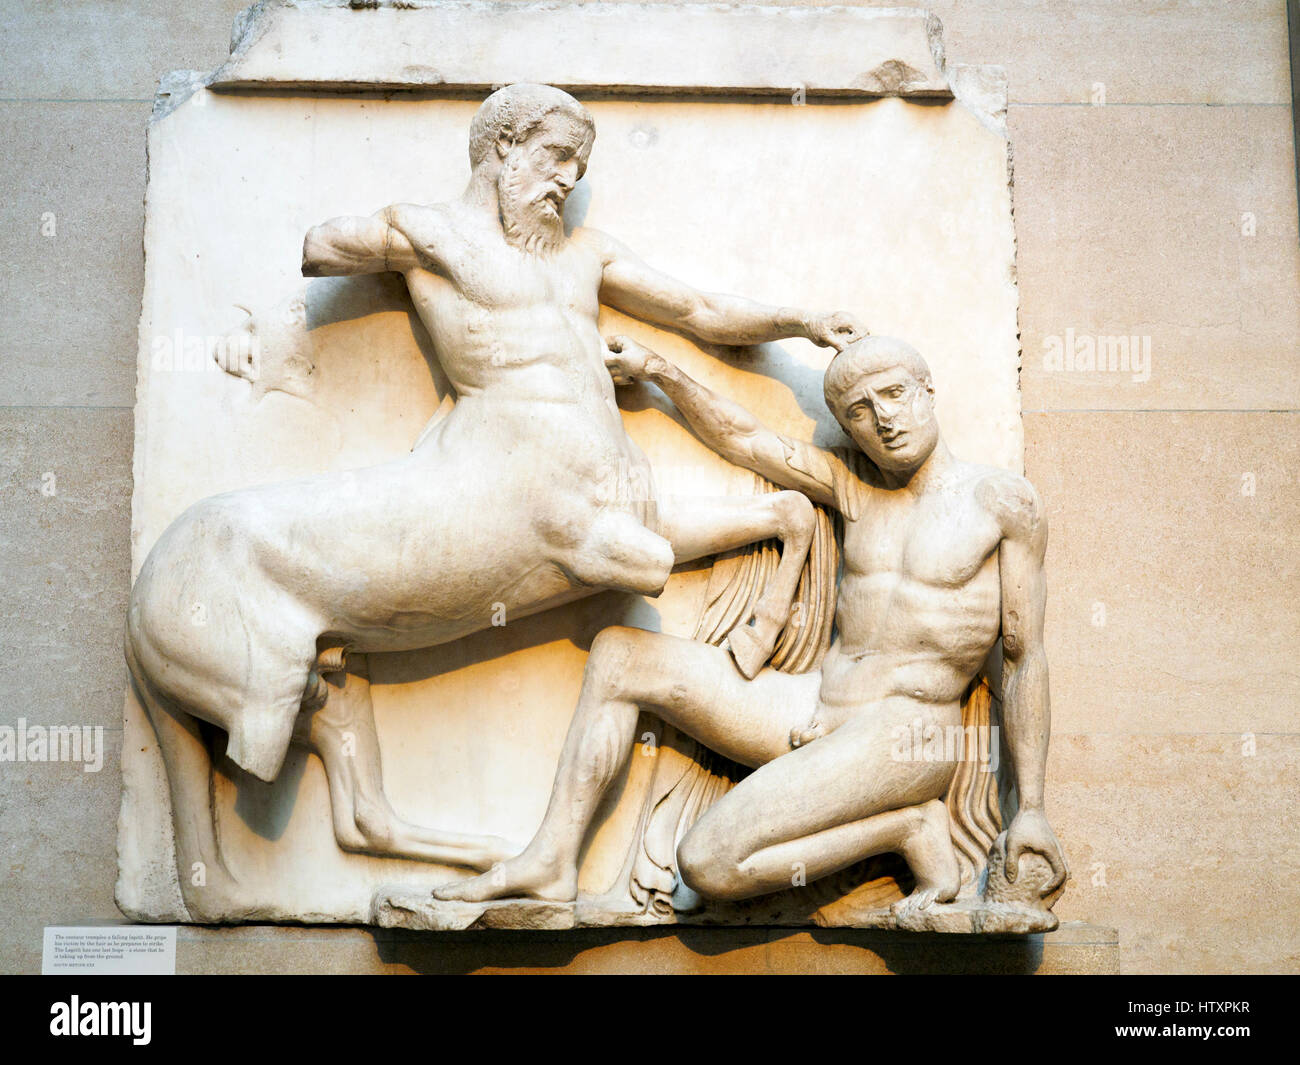 Marble metope from the south side of the Parthenon, showing the battle between Centaurs and Lapiths at the marriage-feast of Peirithoos in the British Museum - London, England Stock Photo